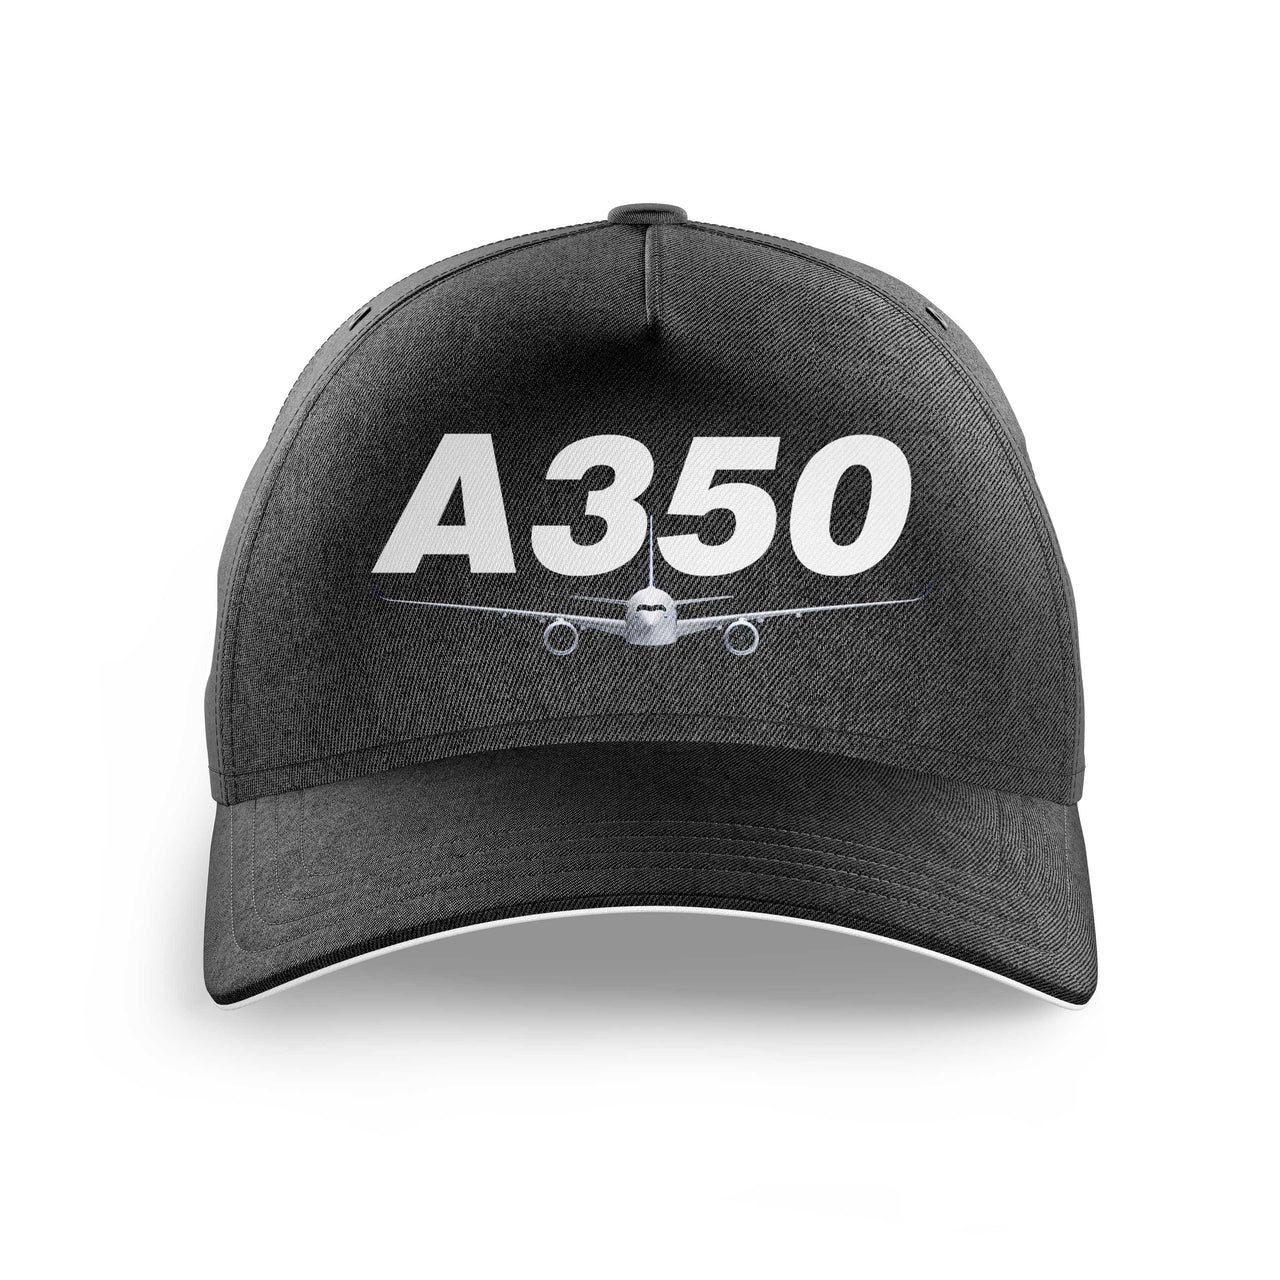 Super Airbus A350 Printed Hats